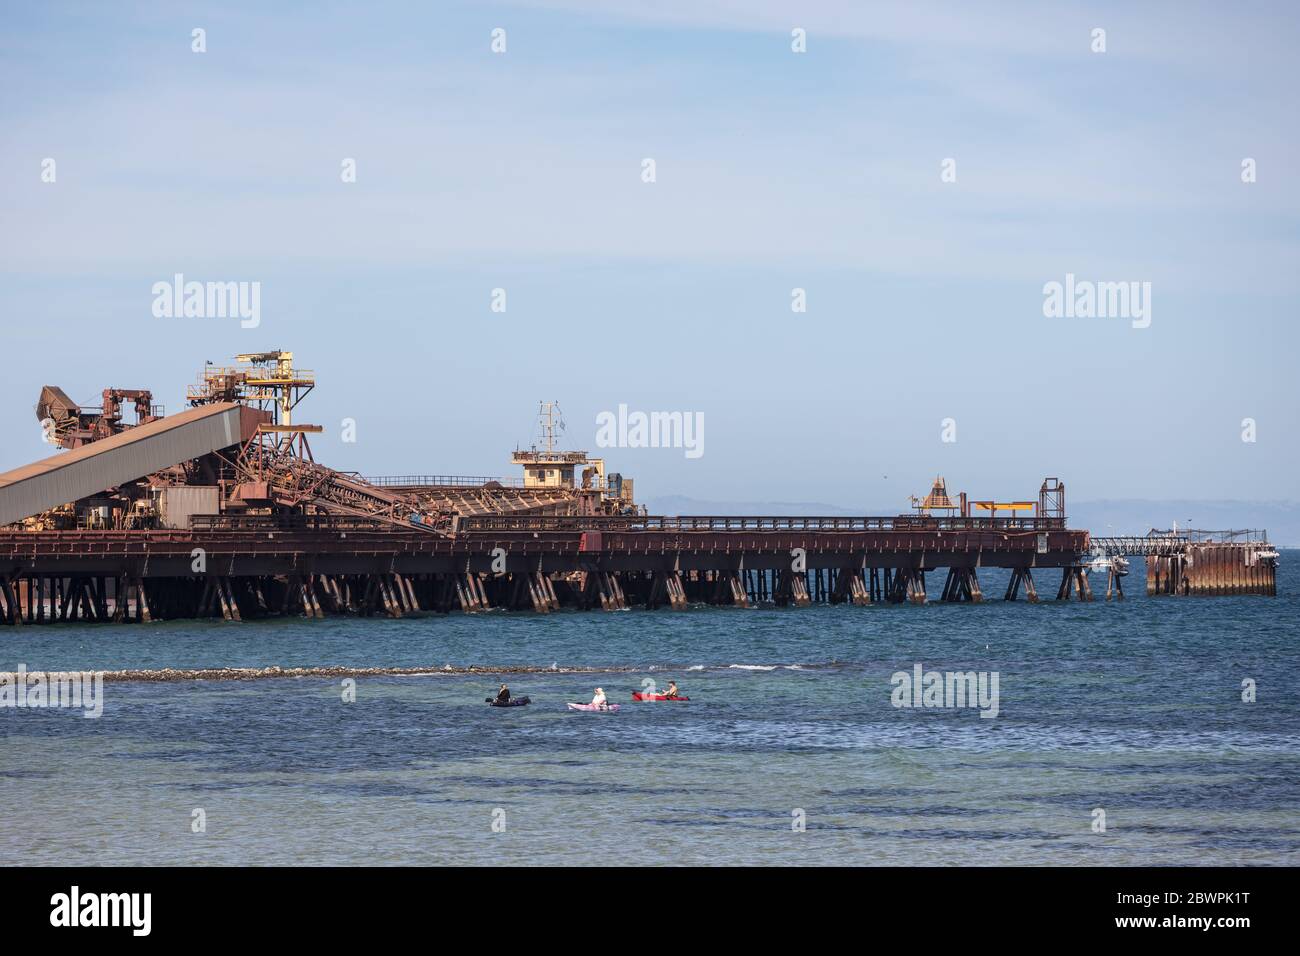 Whyalla South Australia November 17th 2019 : Fishing from a kayak in front of the steelworks jetty at Whyalla port in South Australia Stock Photo